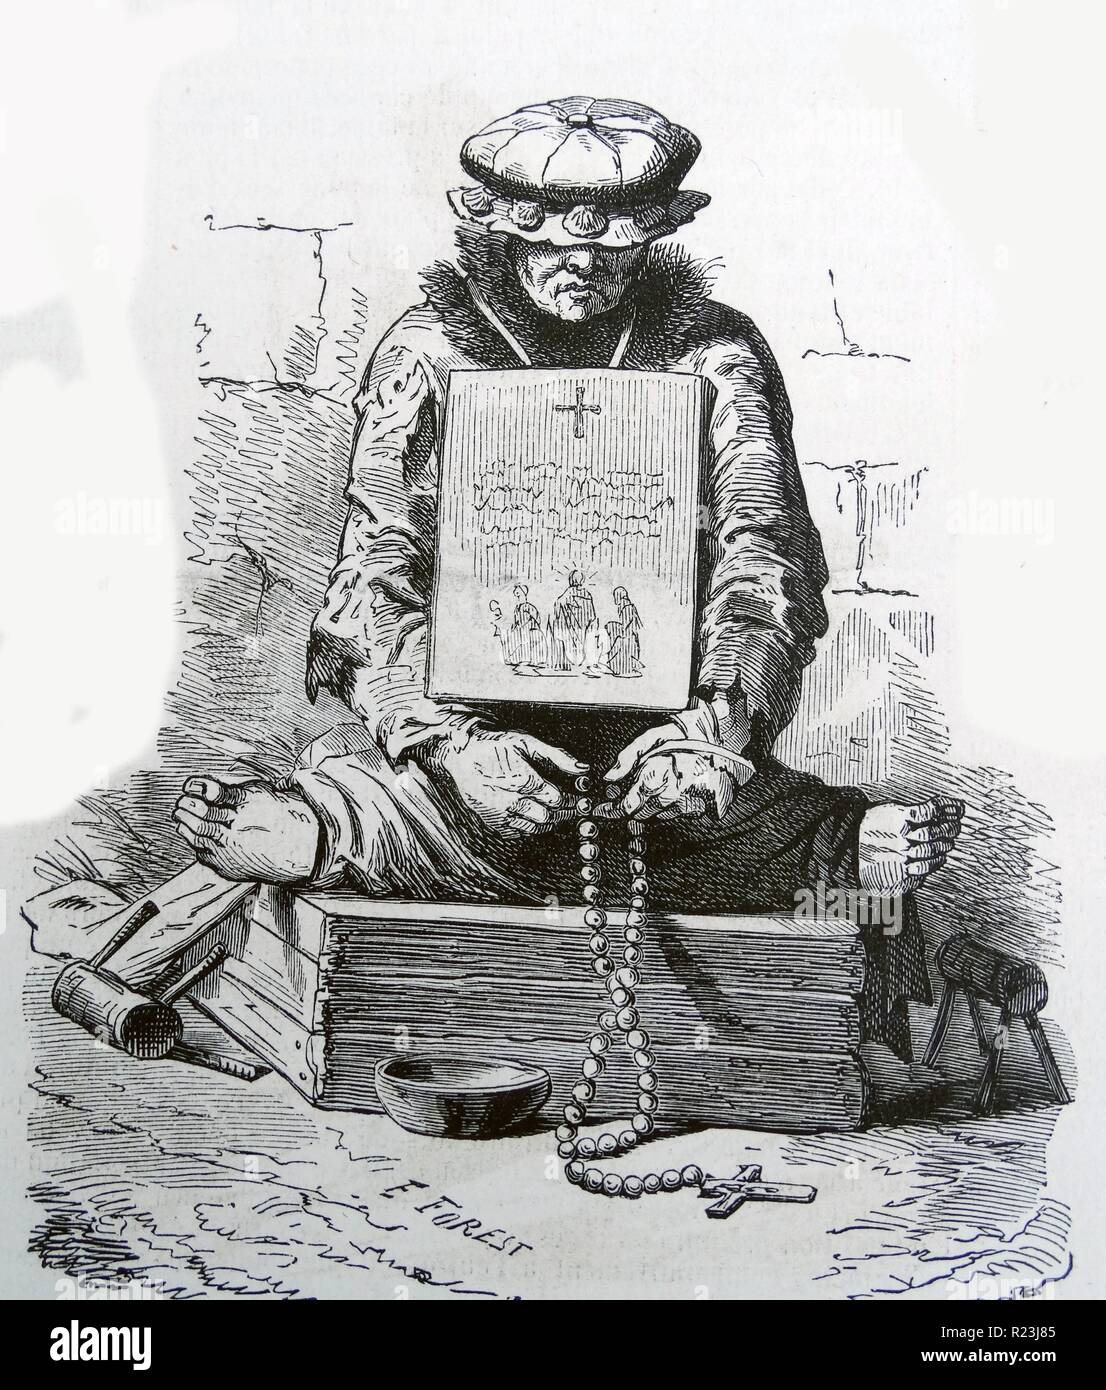 Illustration of a French medieval leper. On either side of him are hand crutches which would be used to propel the leper forward. He is also sat with his head down and covered by a hat, a begging sign around his neck and rosary beads in his hand. Dated 1800 Stock Photo